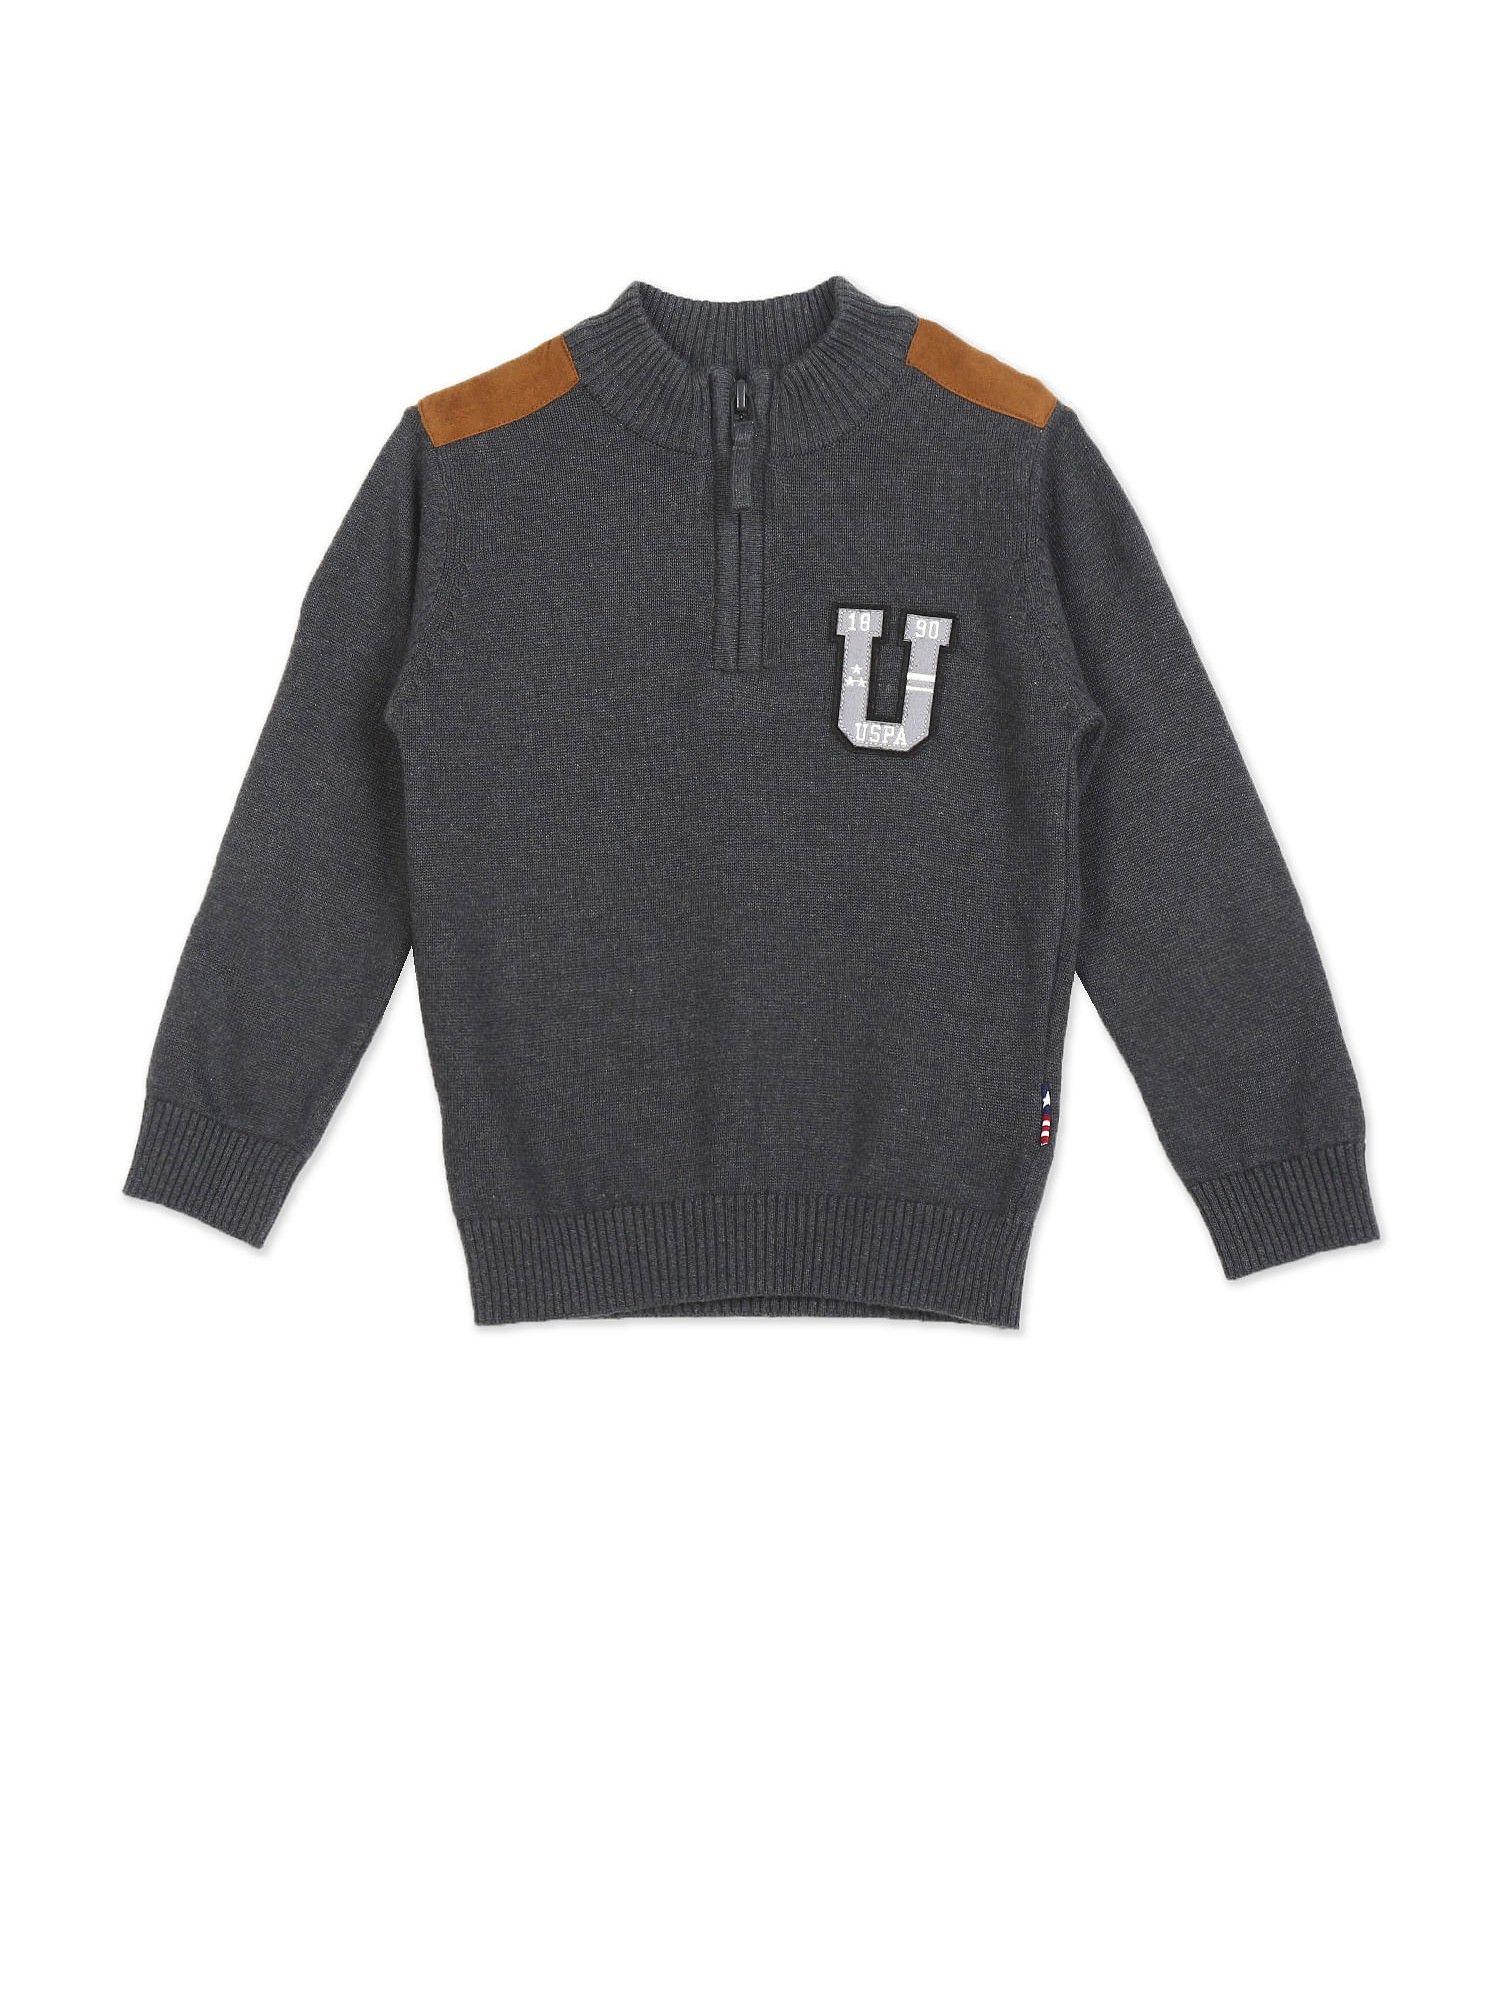 Boys Charcoal High Neck Heathered Sweater